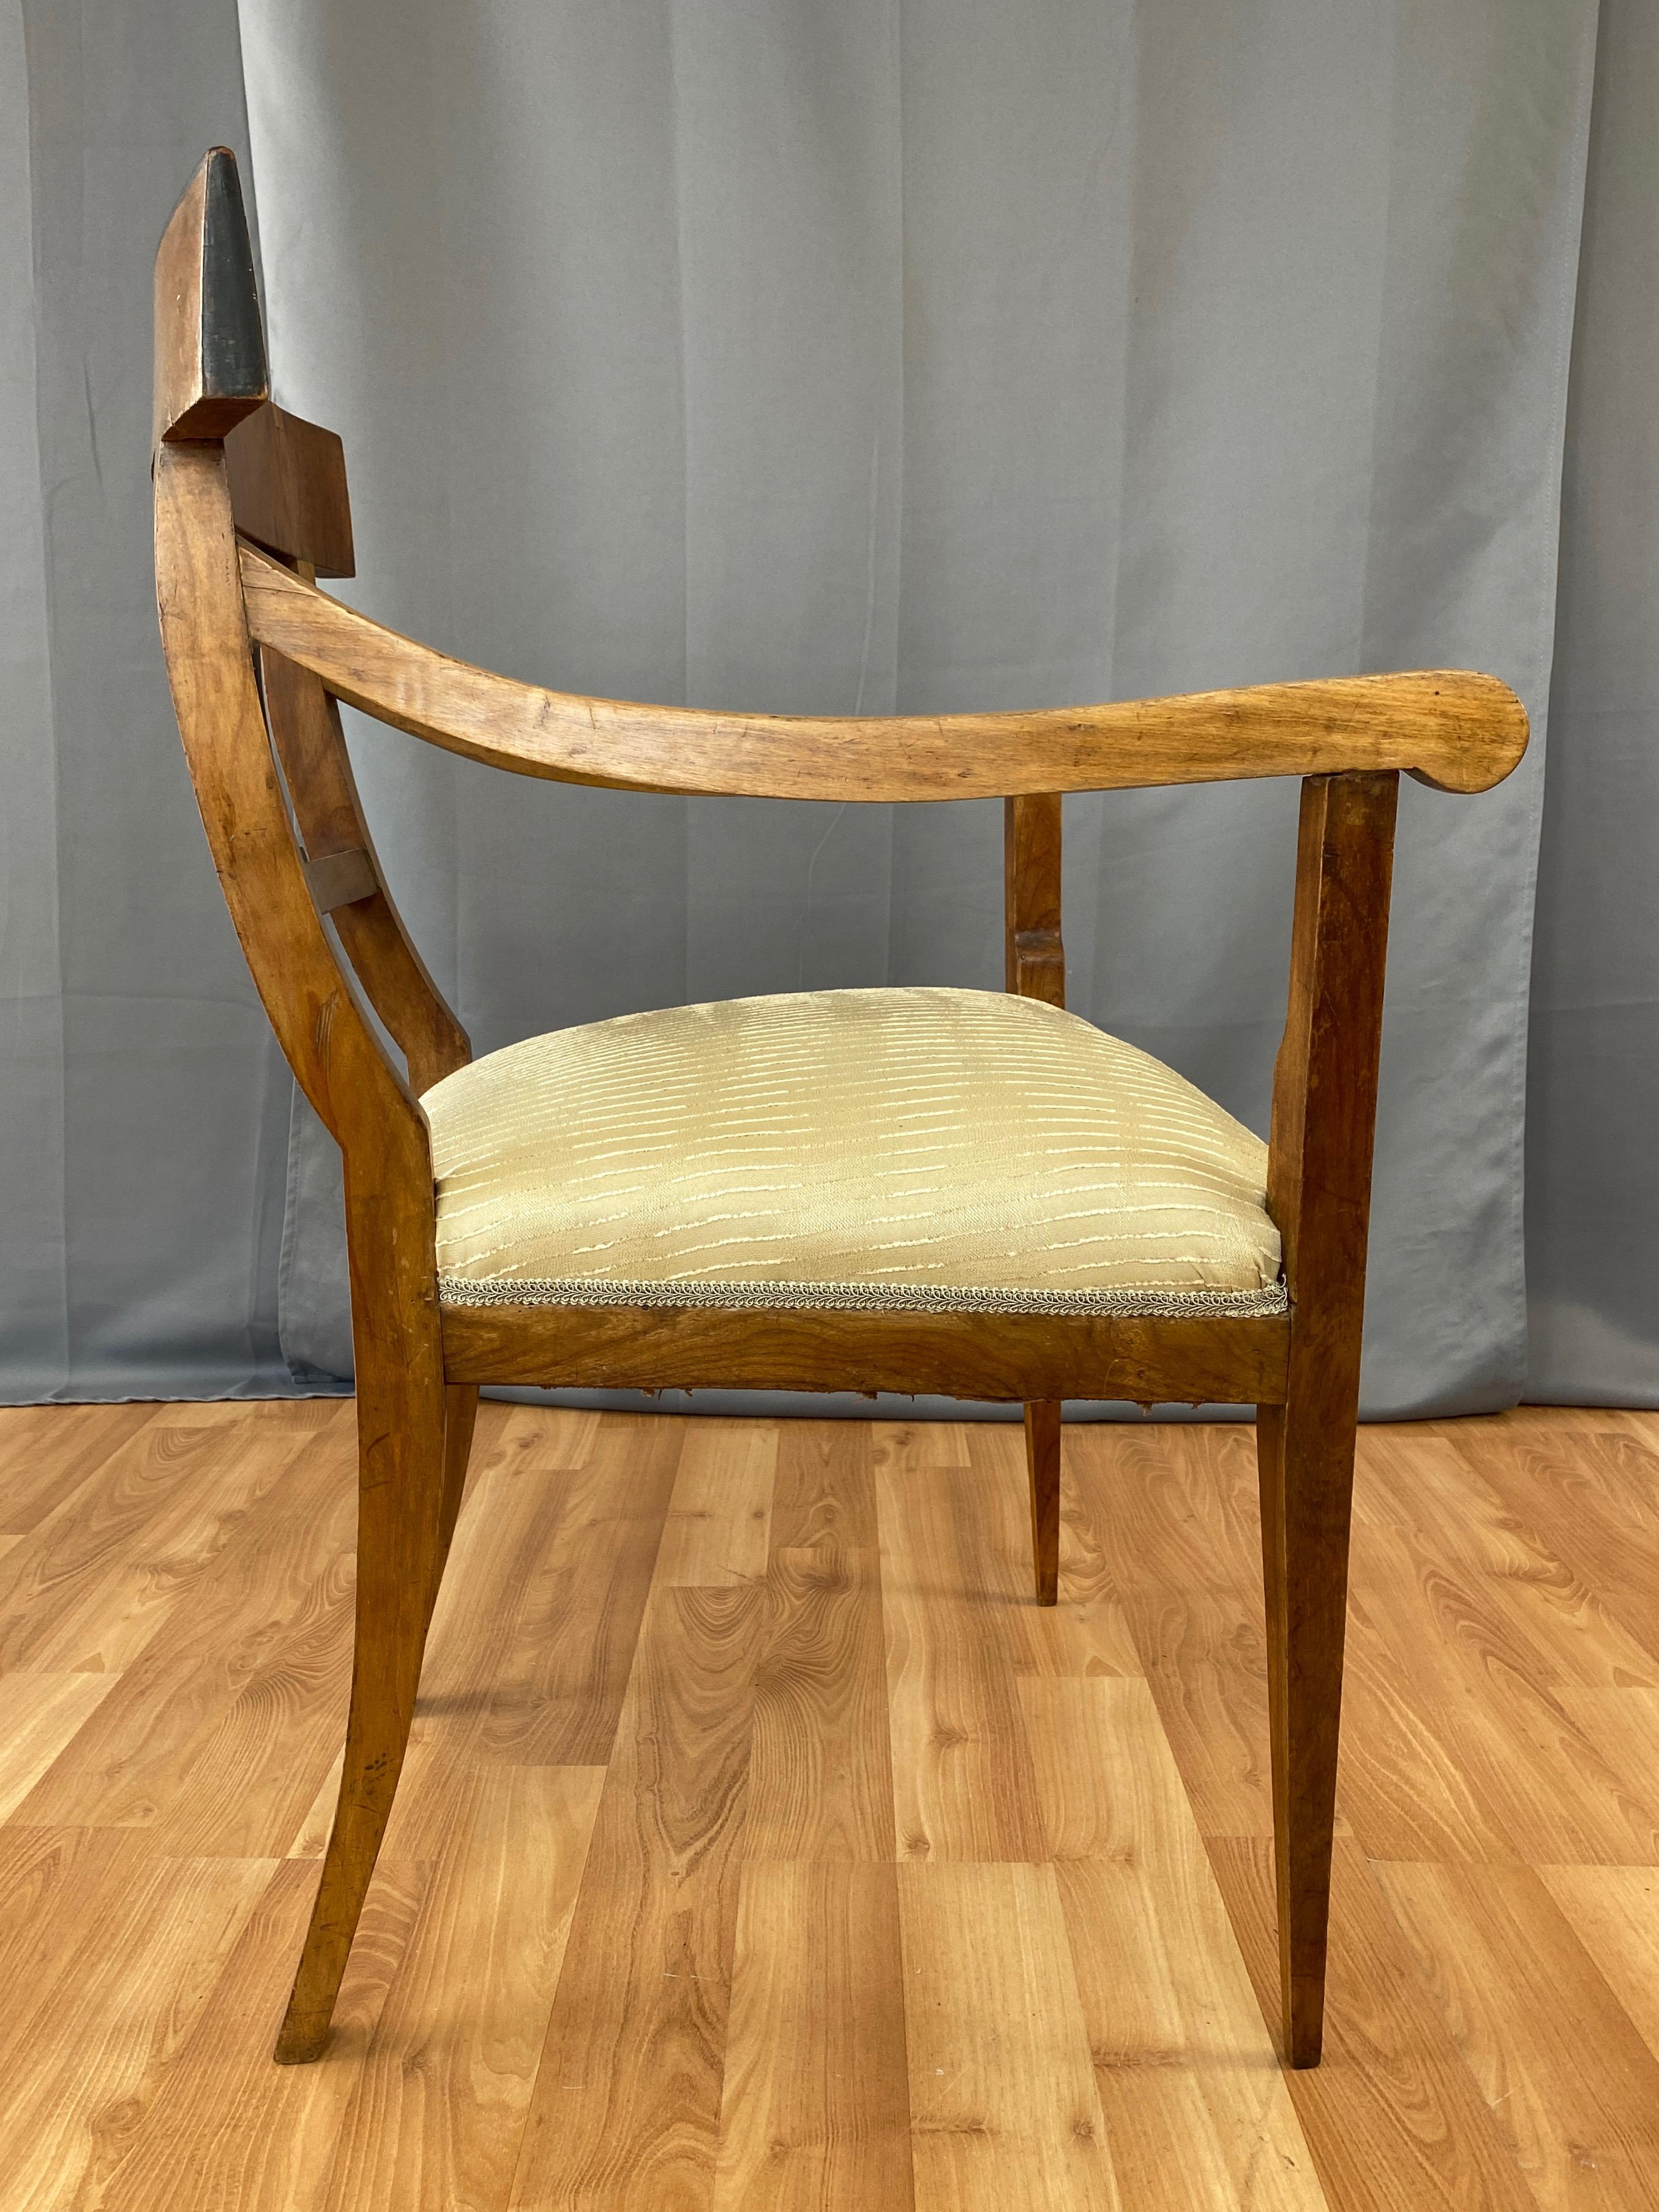 Early 19th Century Early Biedermeier Fruitwood and Ash Armchair with Upholstered Seat, c. 1825